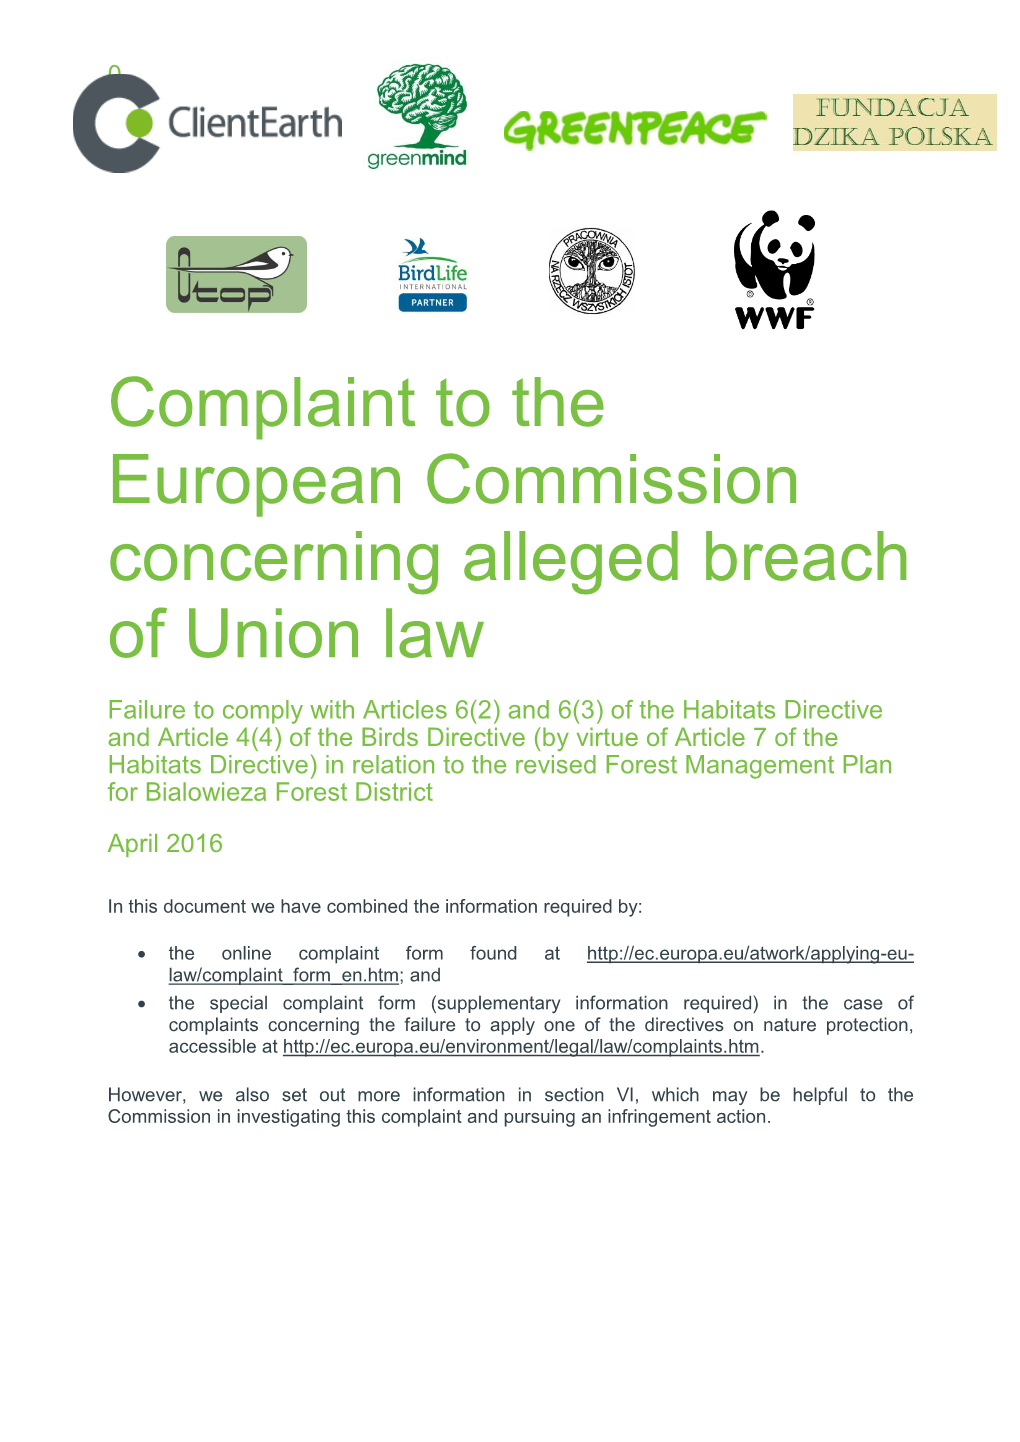 Complaint to the European Commission Concerning Alleged Breach of Union Law